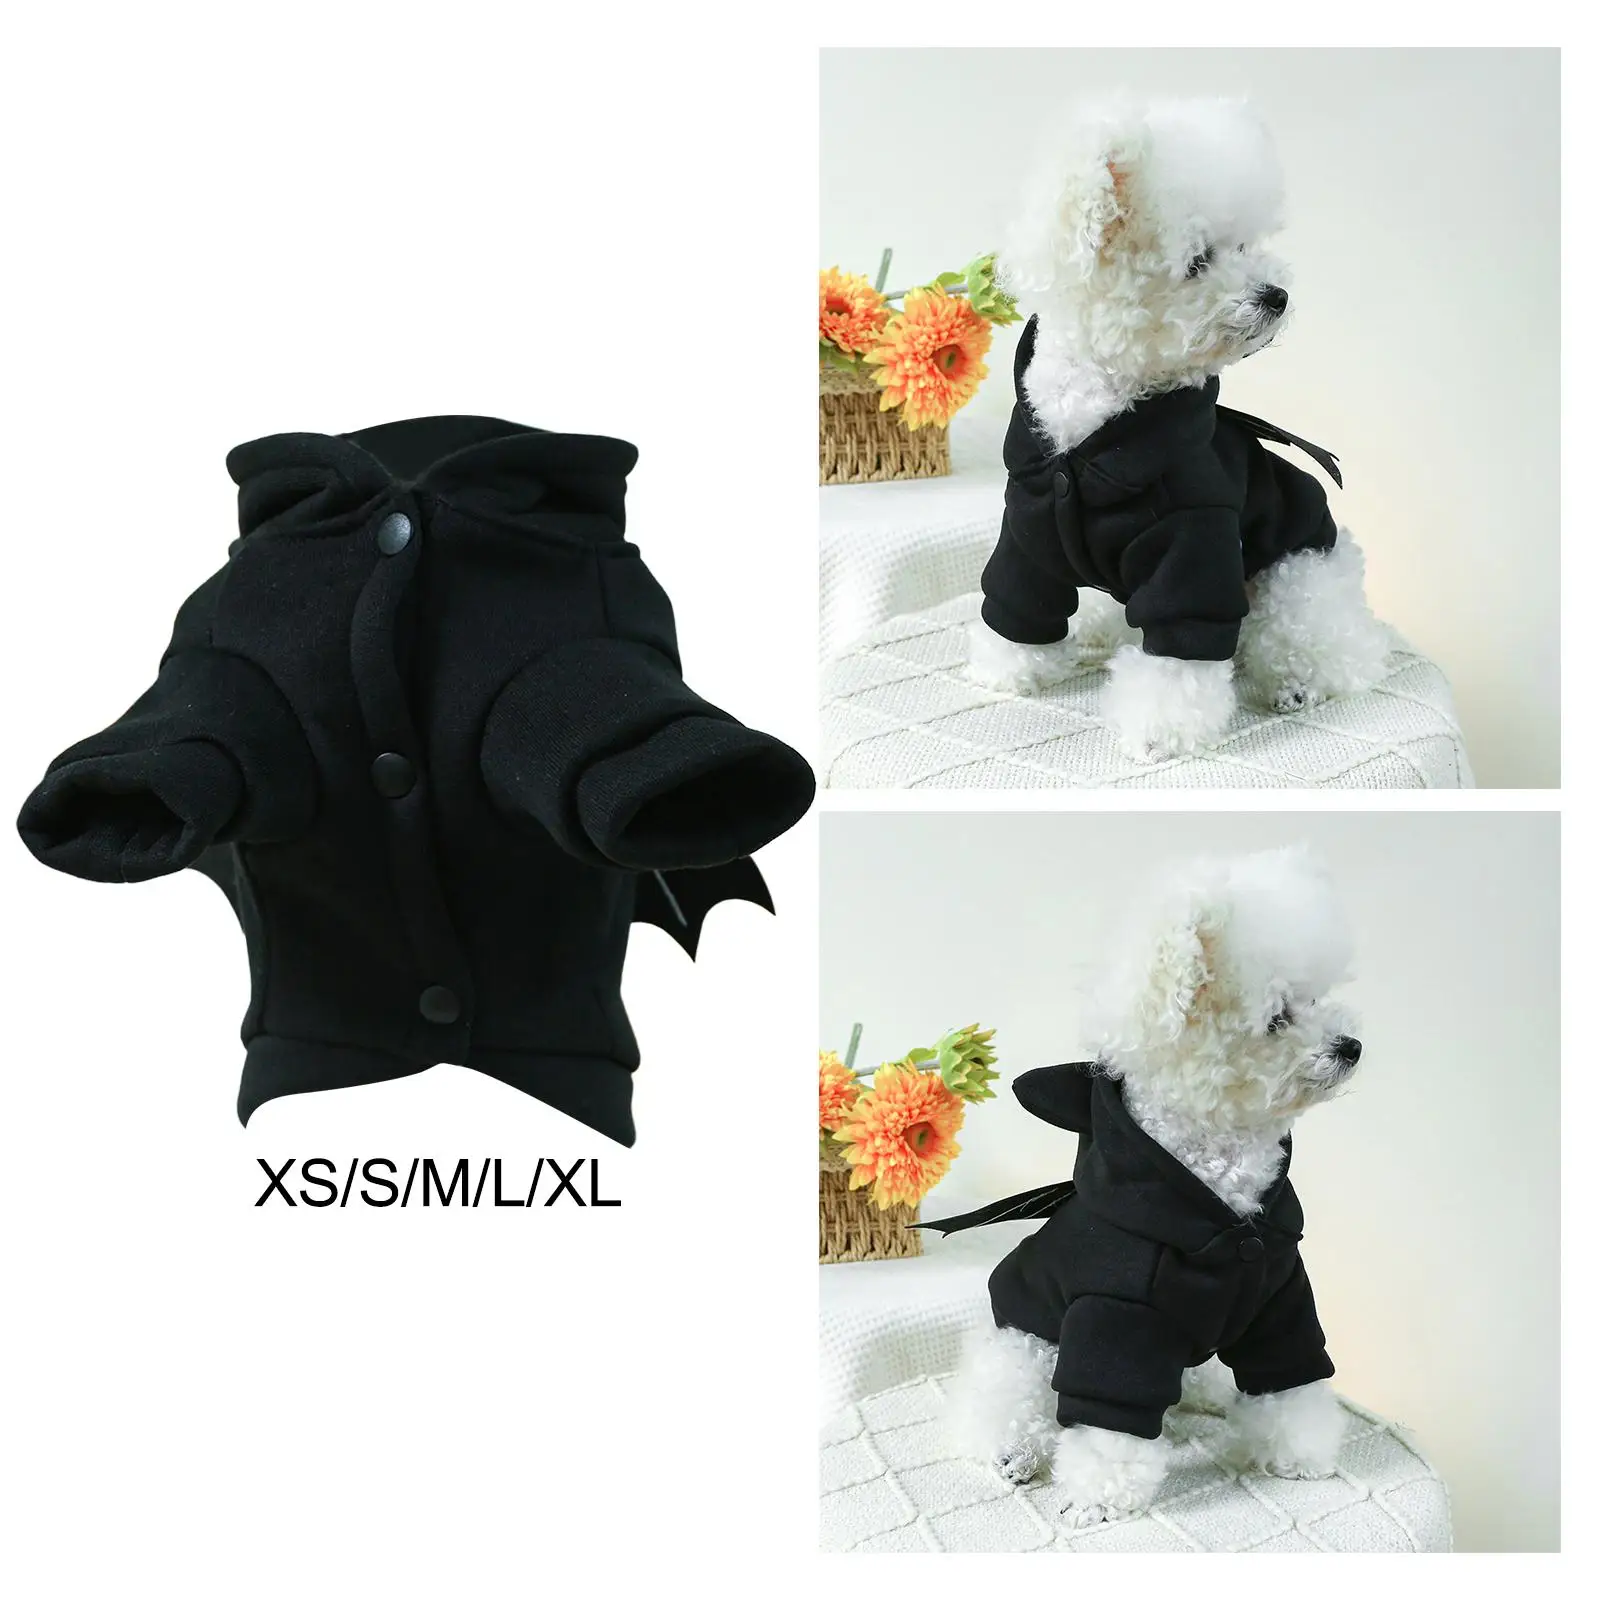 Pet Costume Cat Cosplay Halloween Dog Costume Funny Dress up Decor Cute Accessories Kitten Puppy Apparel Dog Clothes for Holiday